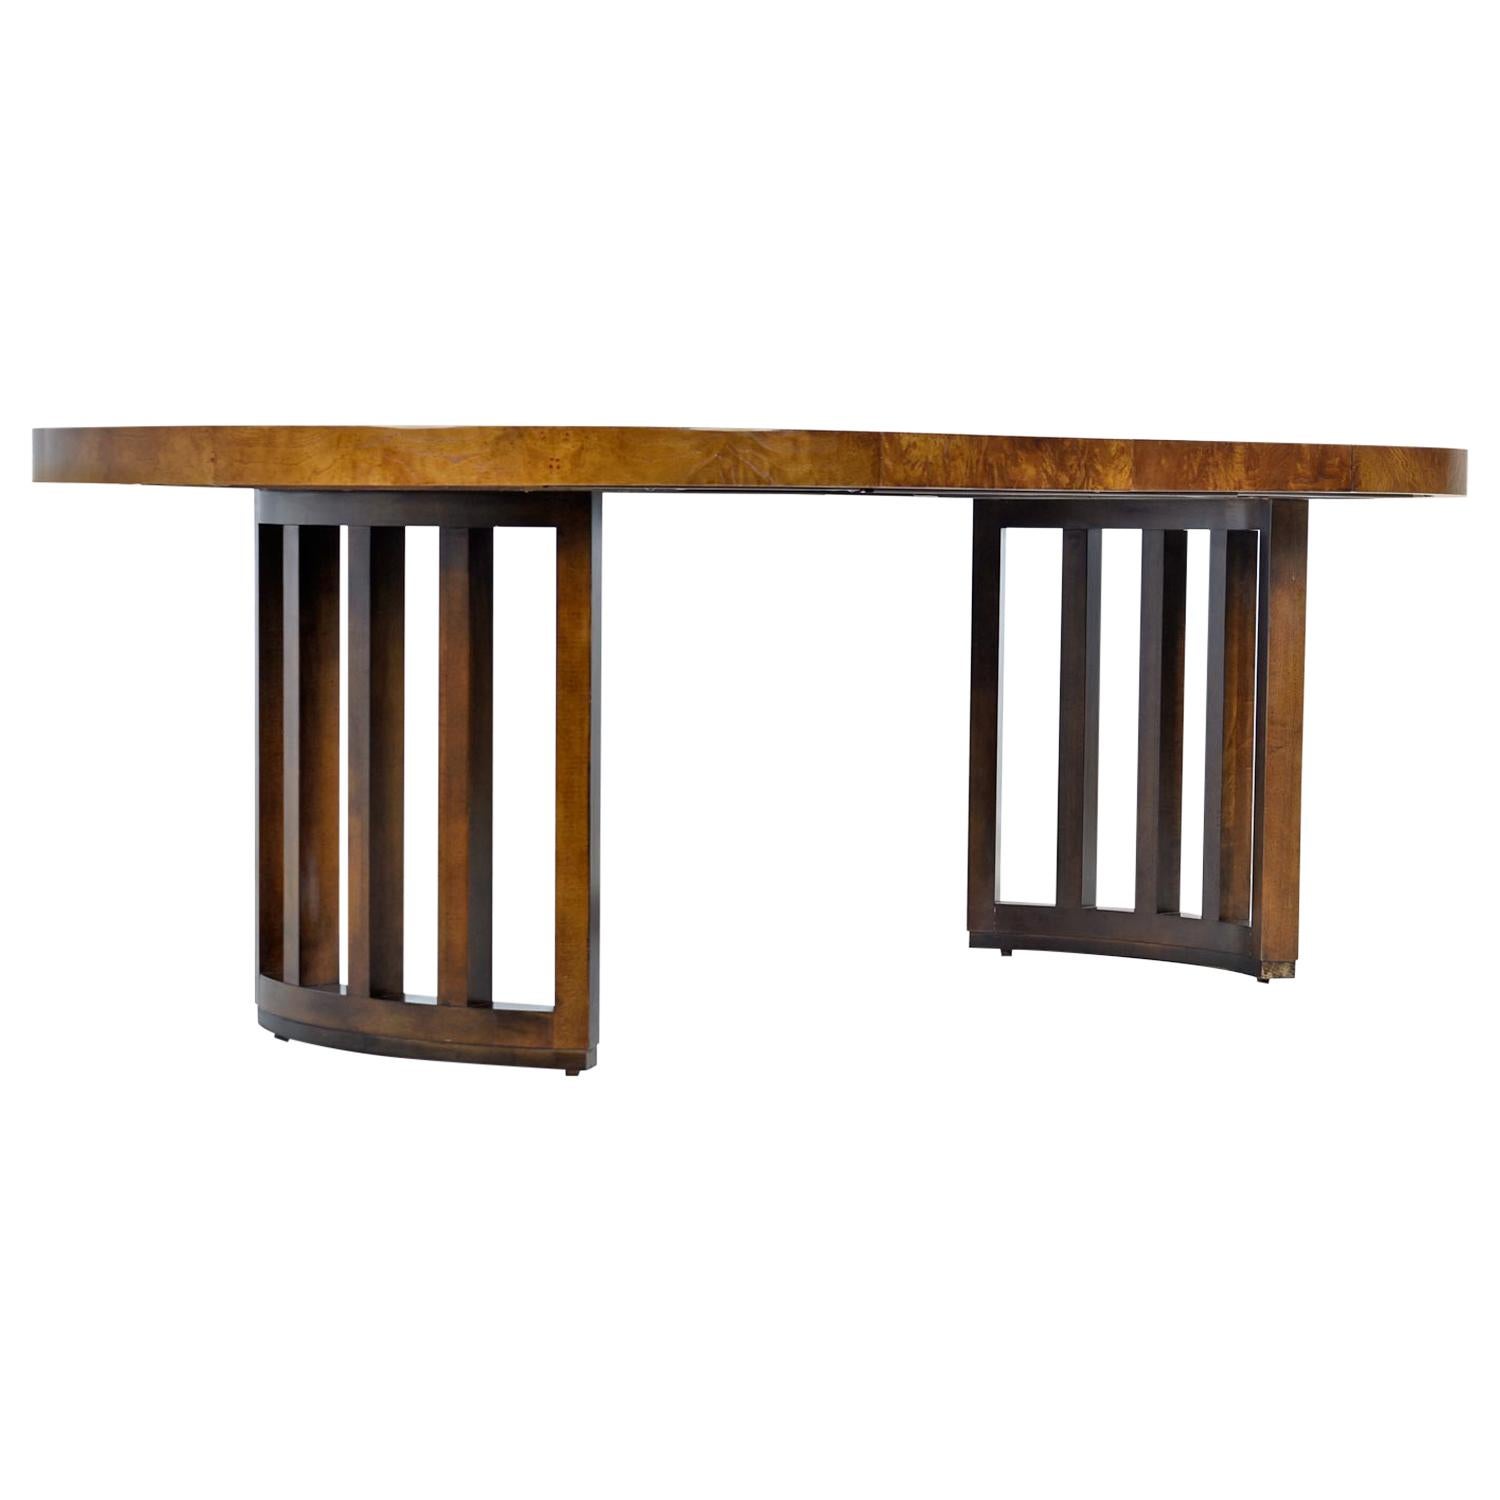 Stunning and large elliptical dining table made by esteemed US furniture maker century, circa 1970s. Smothered in iridescent burl olive wood that flows over onto the stout edge band. The stylish, architectural cage pedestal base not only mimics the